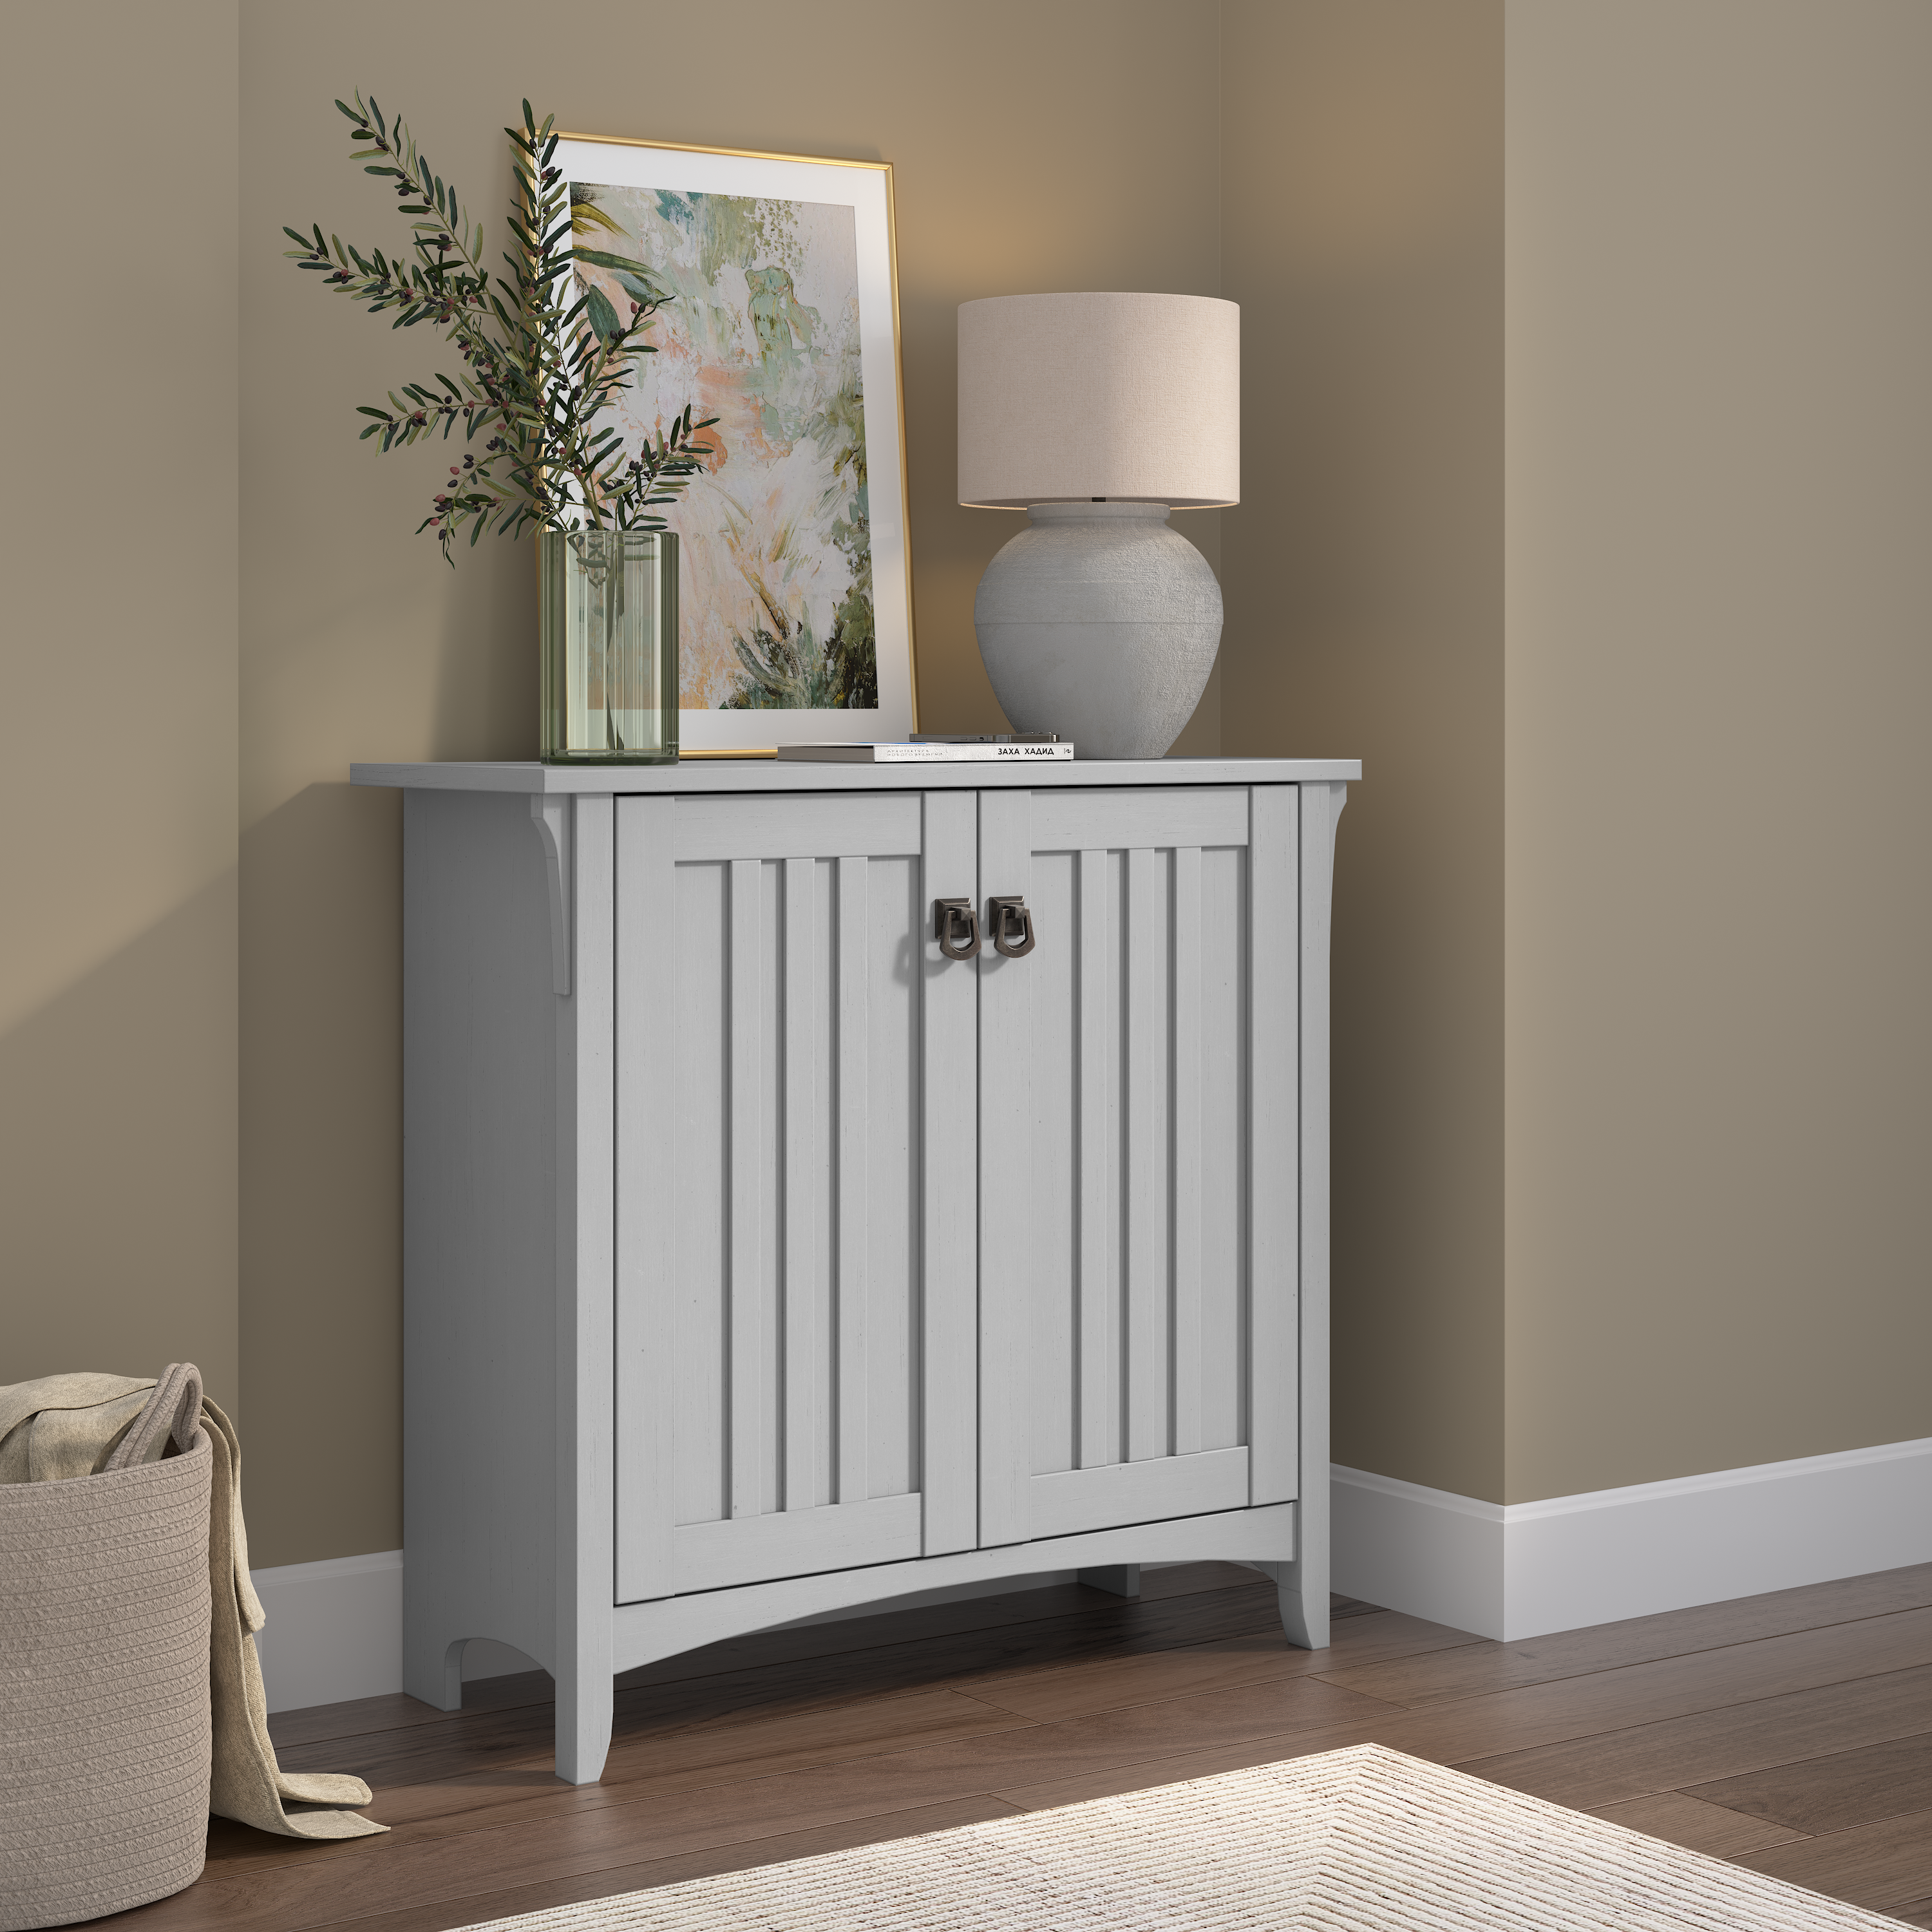 Shop Bush Furniture Salinas Small Storage Cabinet with Doors and Shelves 01 SAS632CG-03 #color_cape cod gray